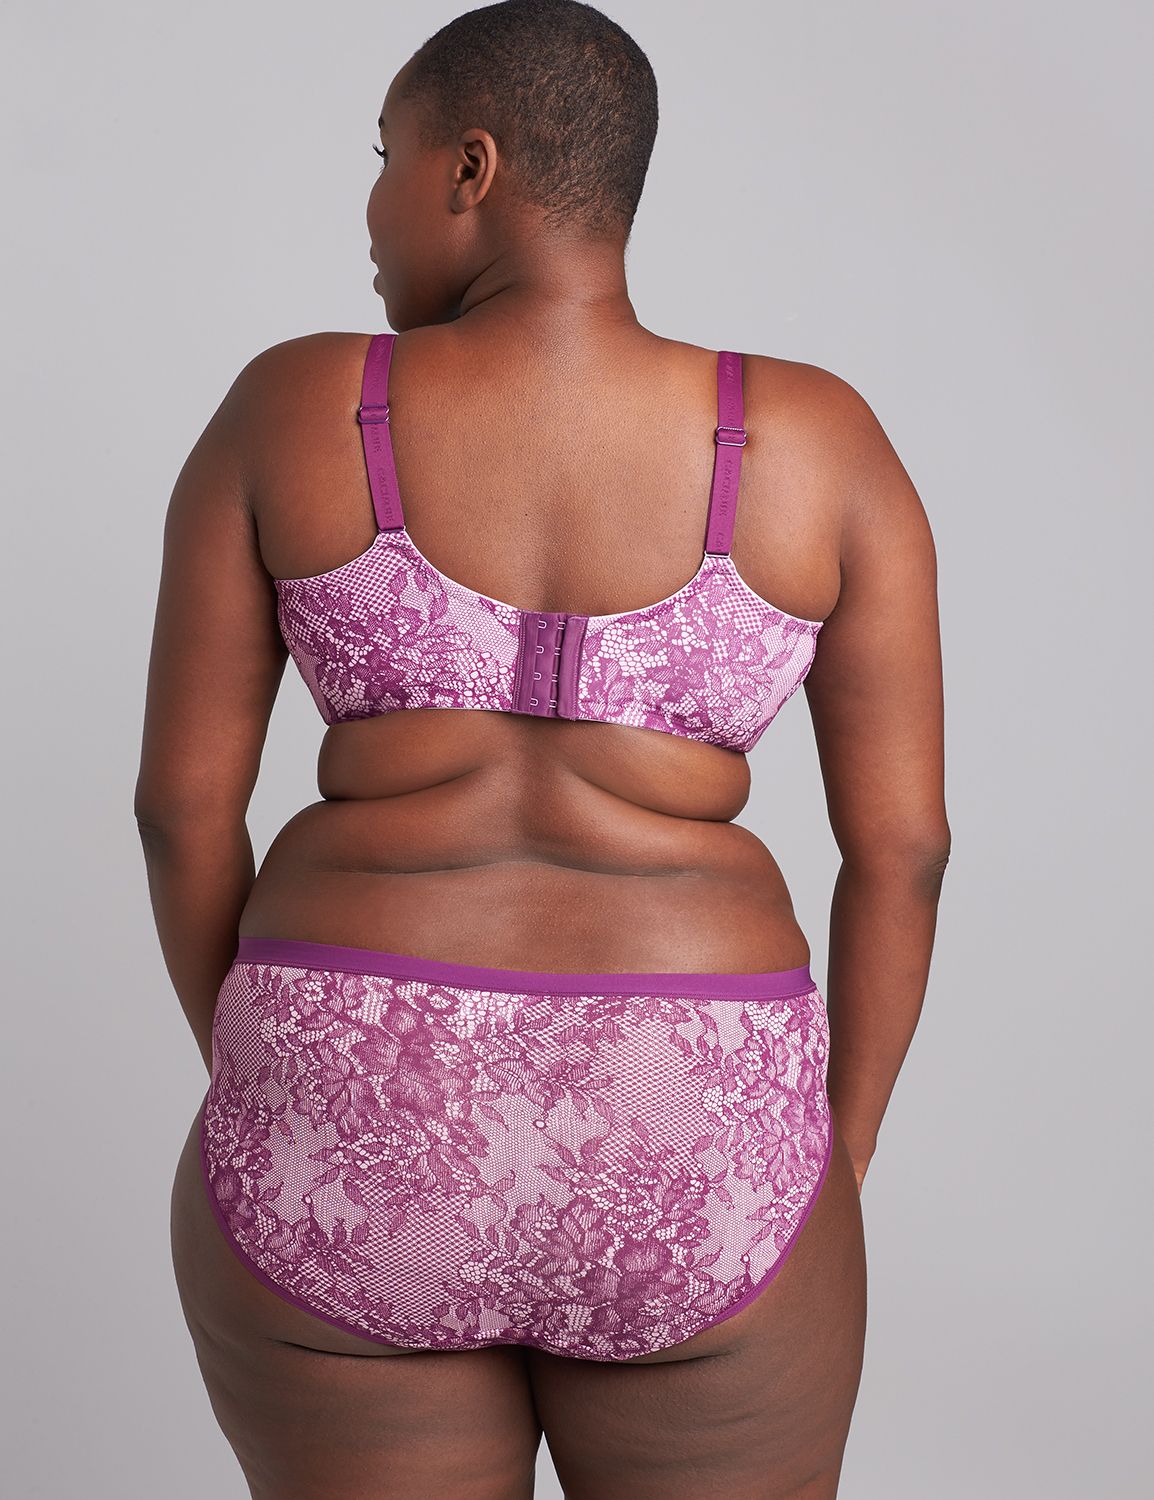 So Light Boost Plunge Print 1118927:Chantilly Lace_PinkLavender_CSP15  906:40B